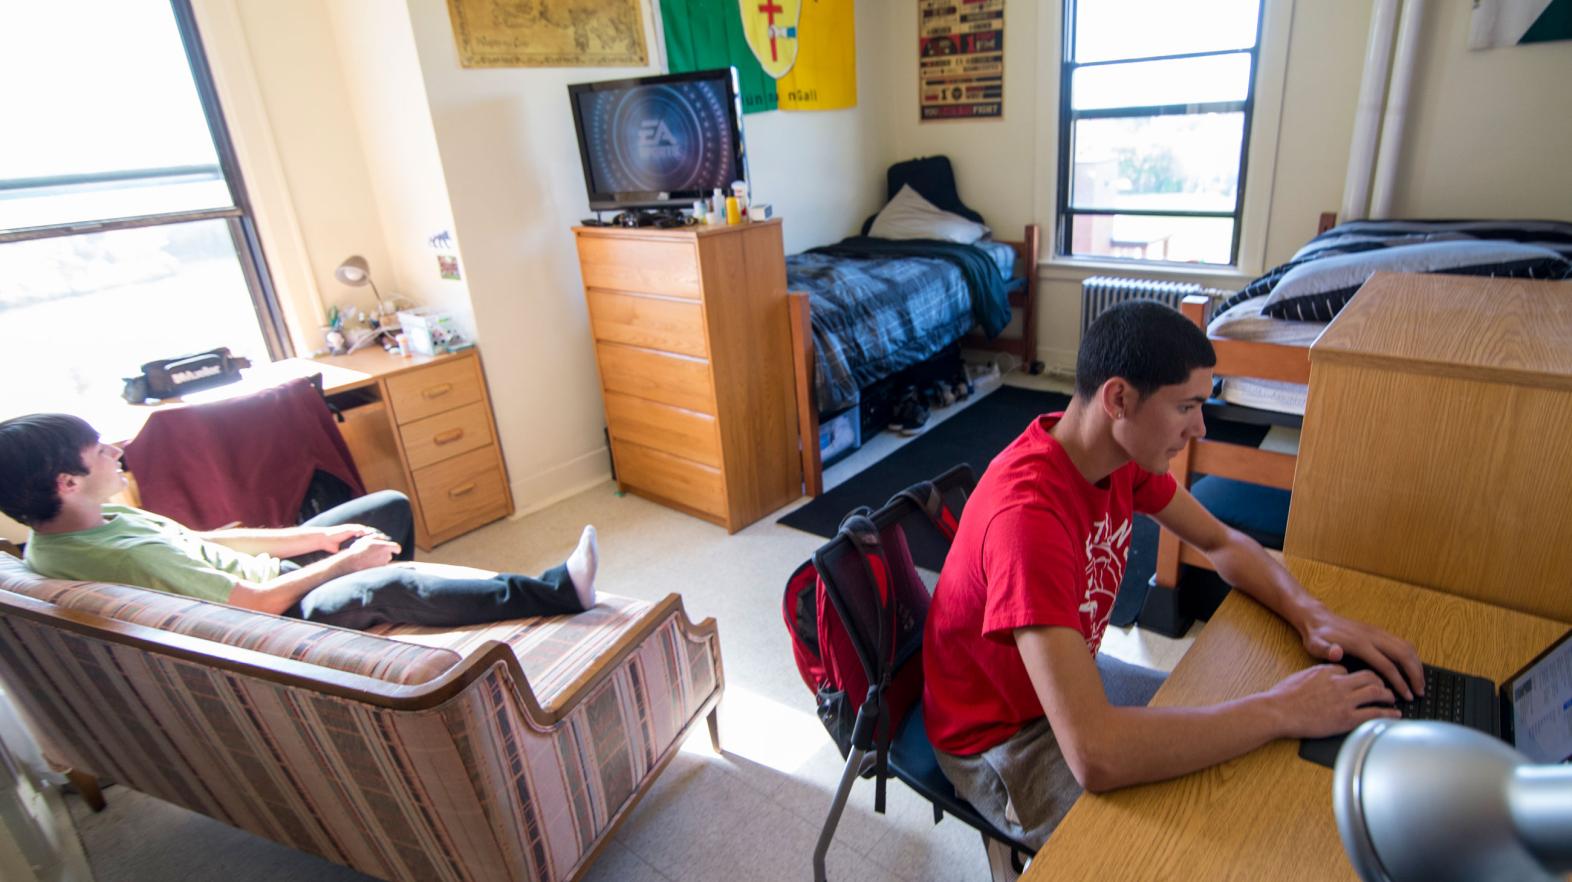 A student sites at his desk to work on his laptop while his roommate plays video games in their residence hall room.